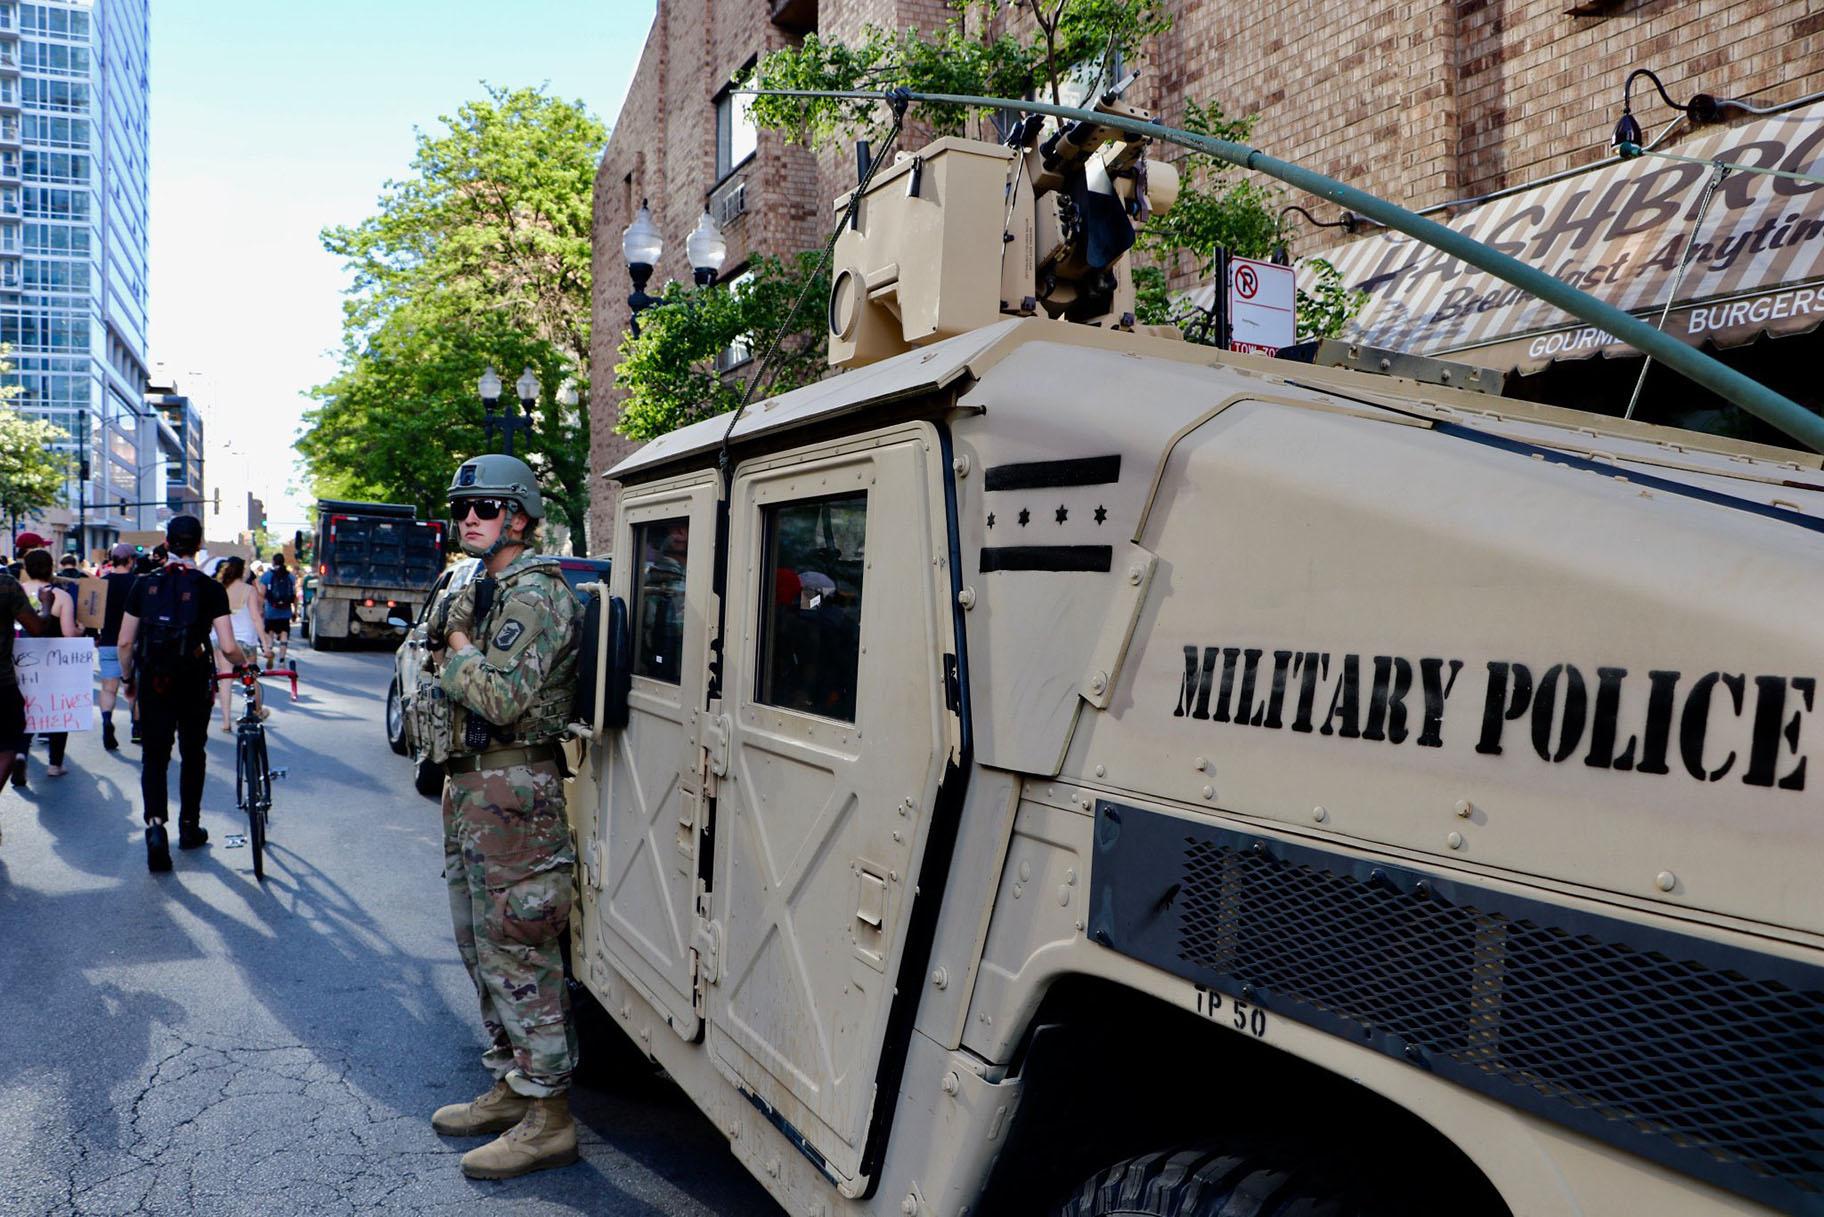 An Illinois National Guard officer watches a protest along Wells Street on June 6, 2020. The march was one of many in the city and across the U.S. sparked by the death of George Floyd while in Minneapolis police custody. (Evan Garcia / WTTW News)